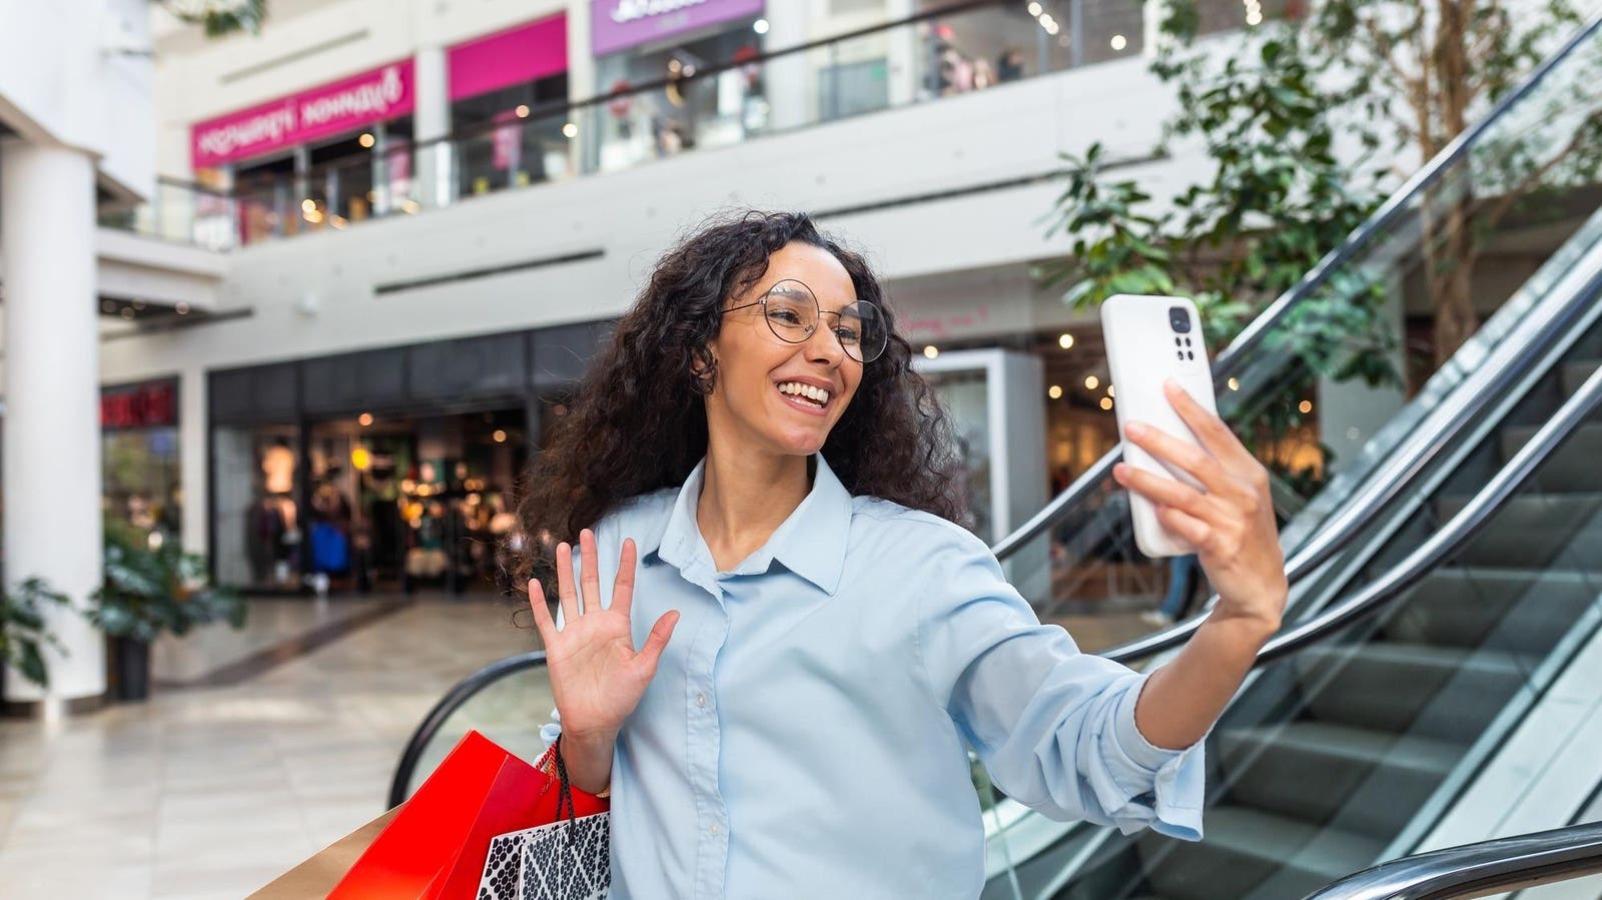 Malls Embrace AI-Based Virtual Influencers To Engage Shoppers